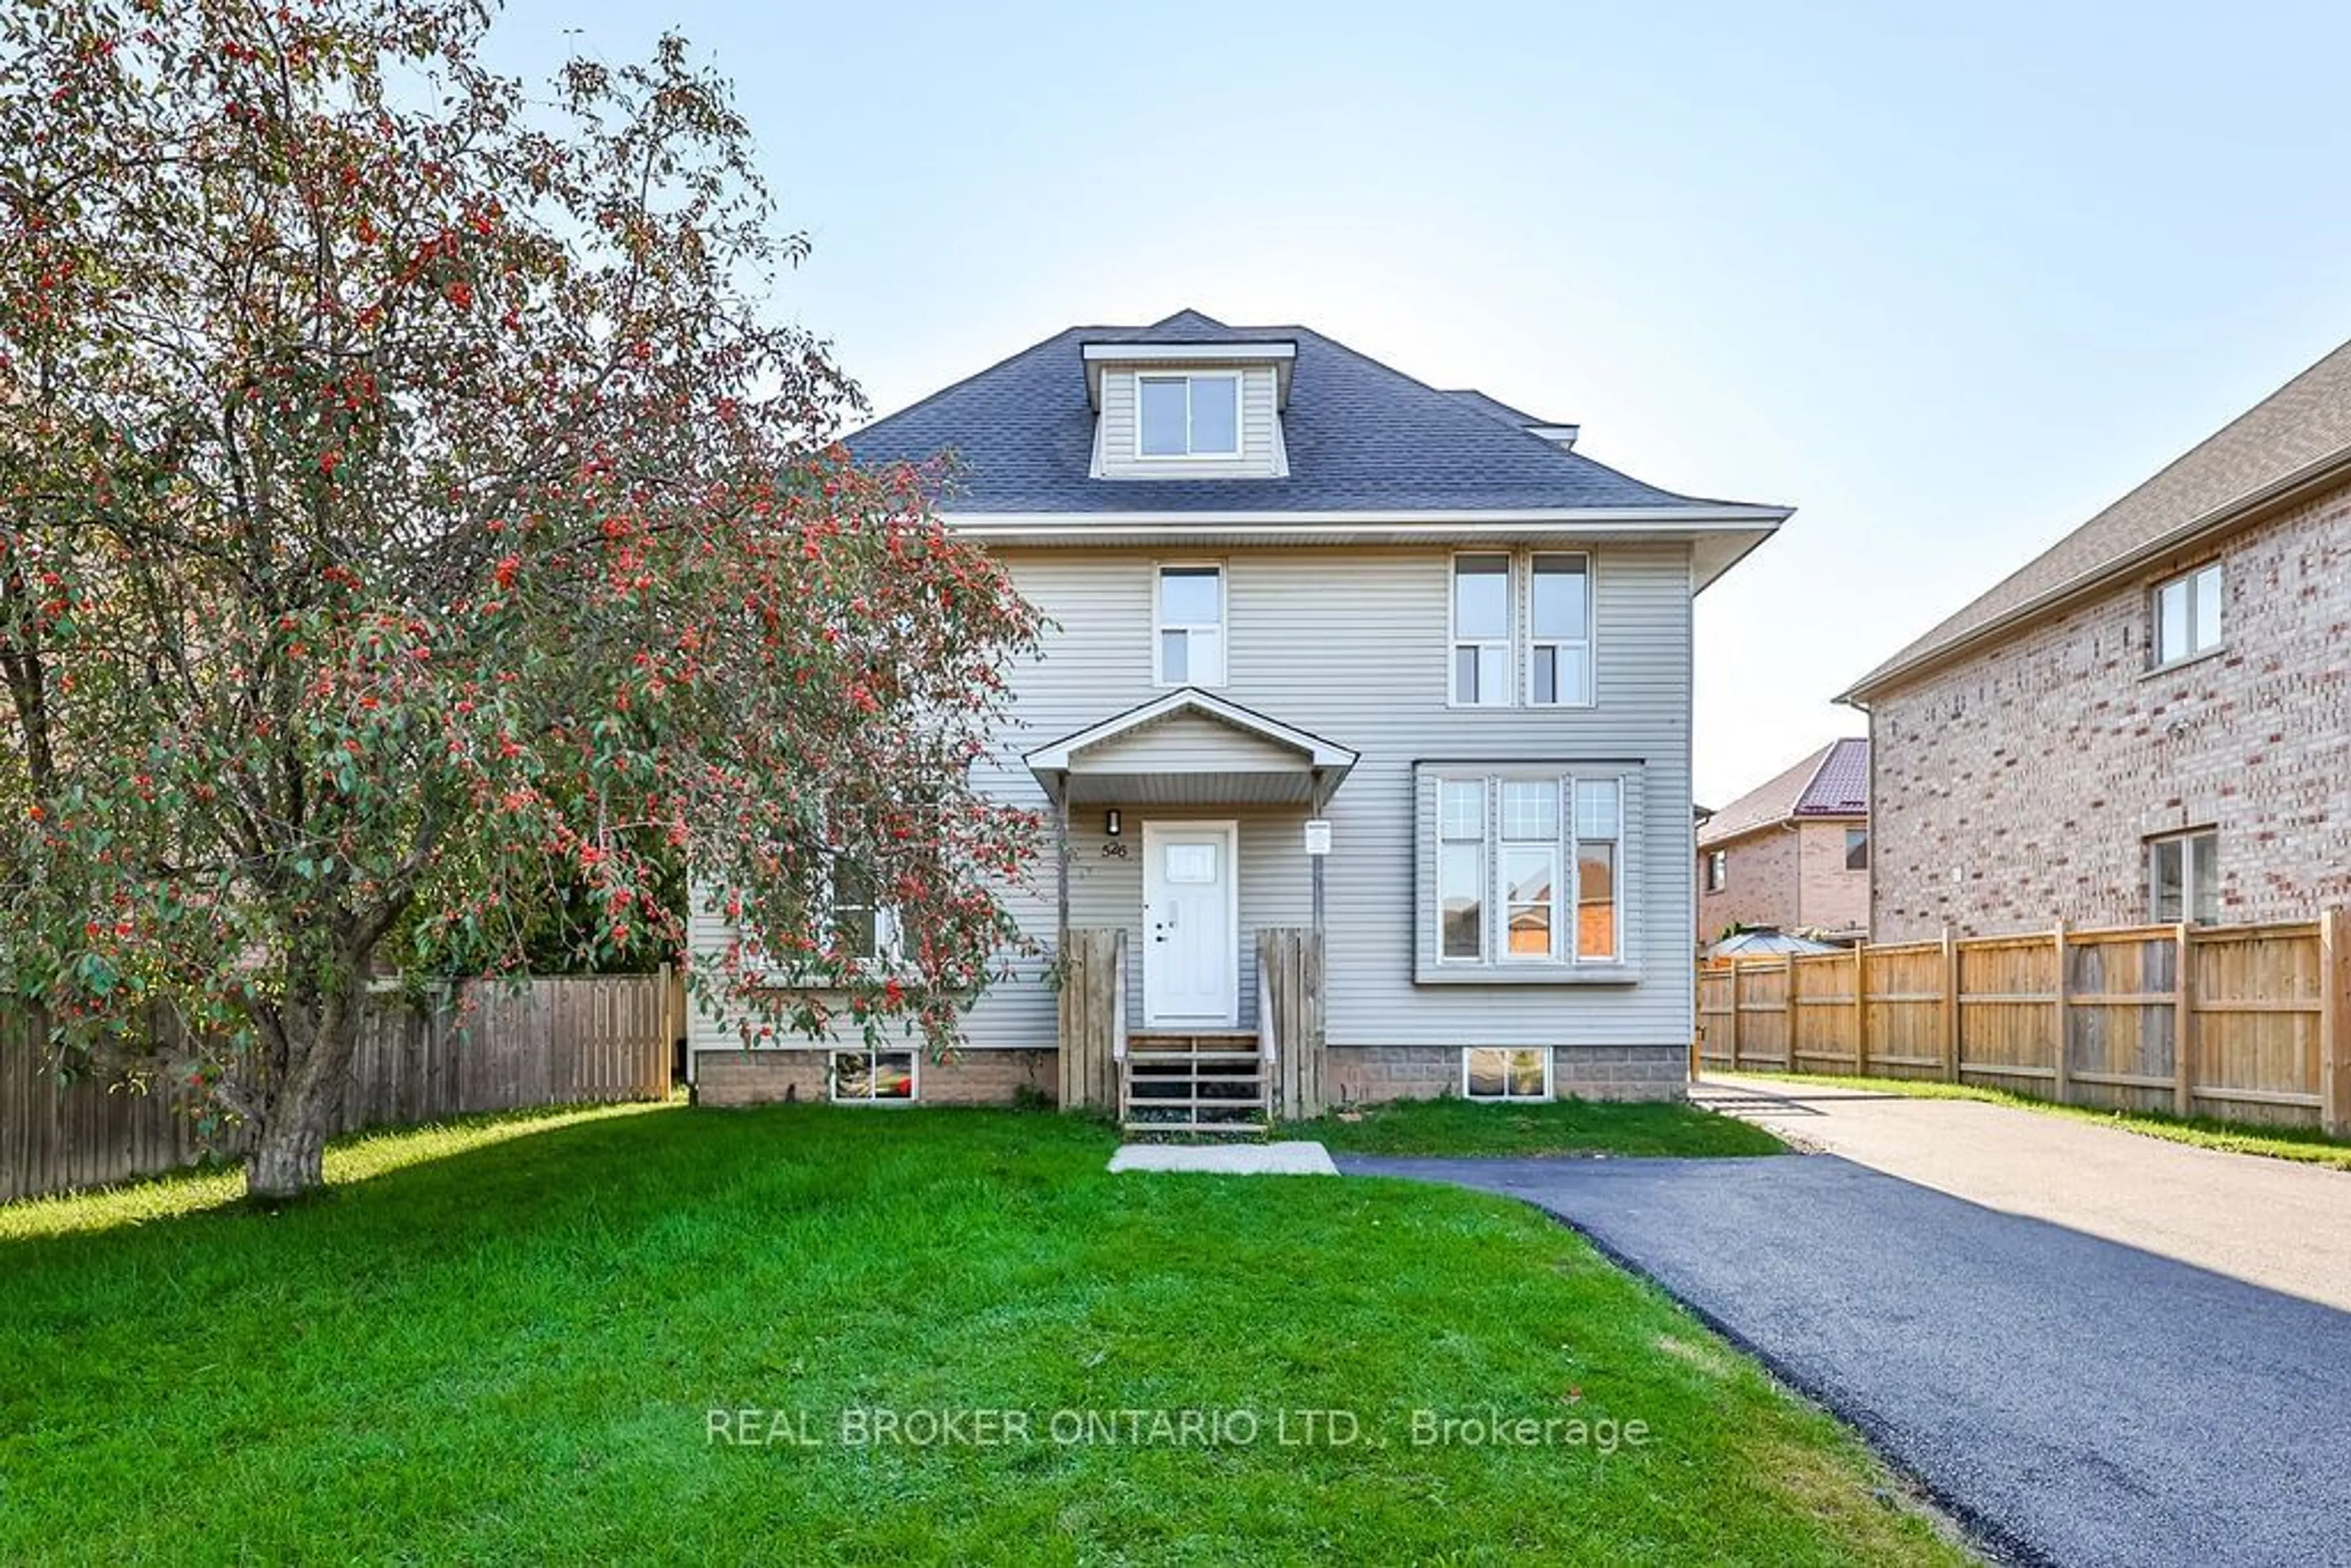 Frontside or backside of a home for 526 Fifty Rd, Hamilton Ontario L8E 5T4